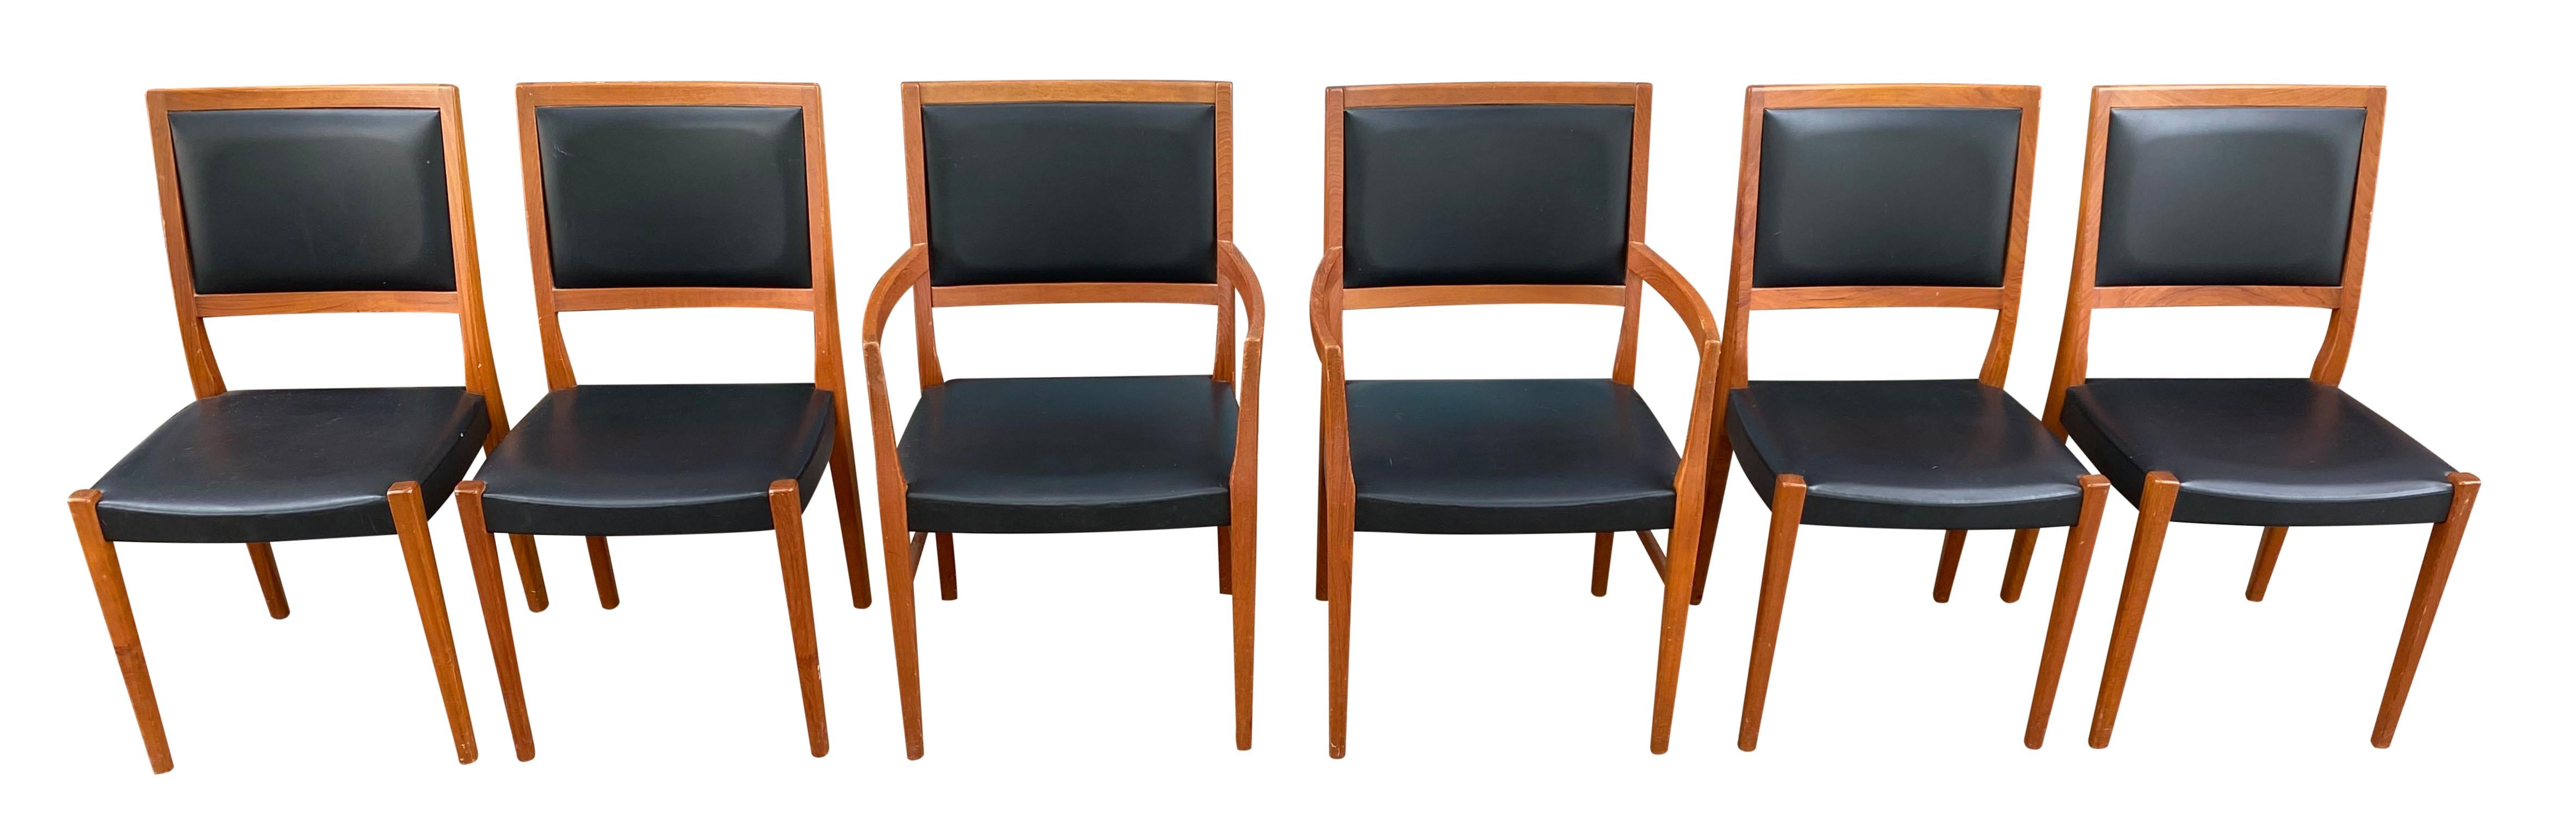 Midcentury Svegards Markaryd 6 teak dining chairs made in Sweden black vinyl upholstery.
(2) Armchairs
(4) Side chairs
(6) Chairs total sold as a set
Very good vintage condition.
Labeled - Svegards Markaryd Made in Sweden
These items are